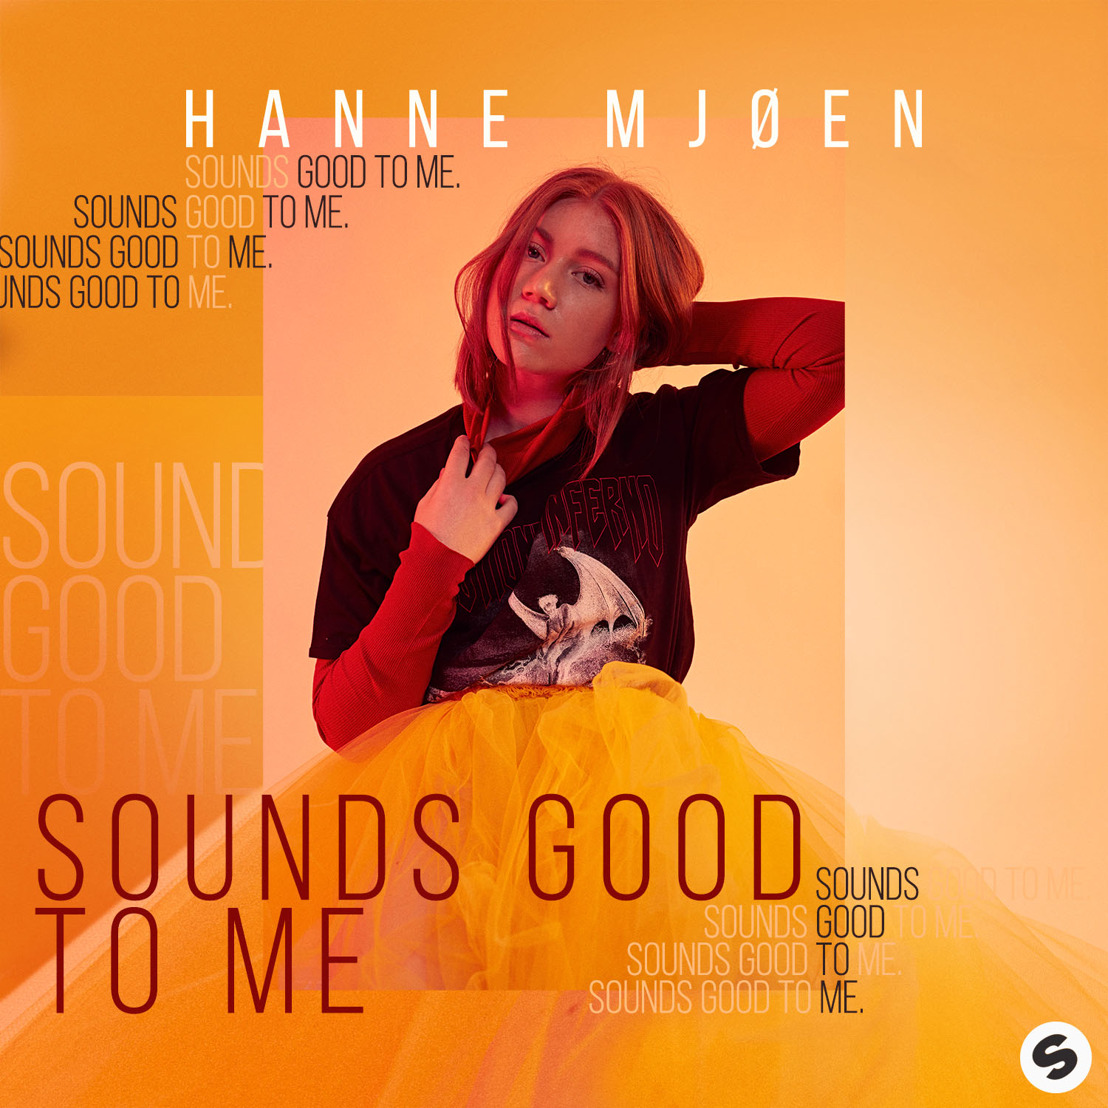 Dance-Worthy Track “Sounds Good To Me” Debuted by Hanne Mjøen